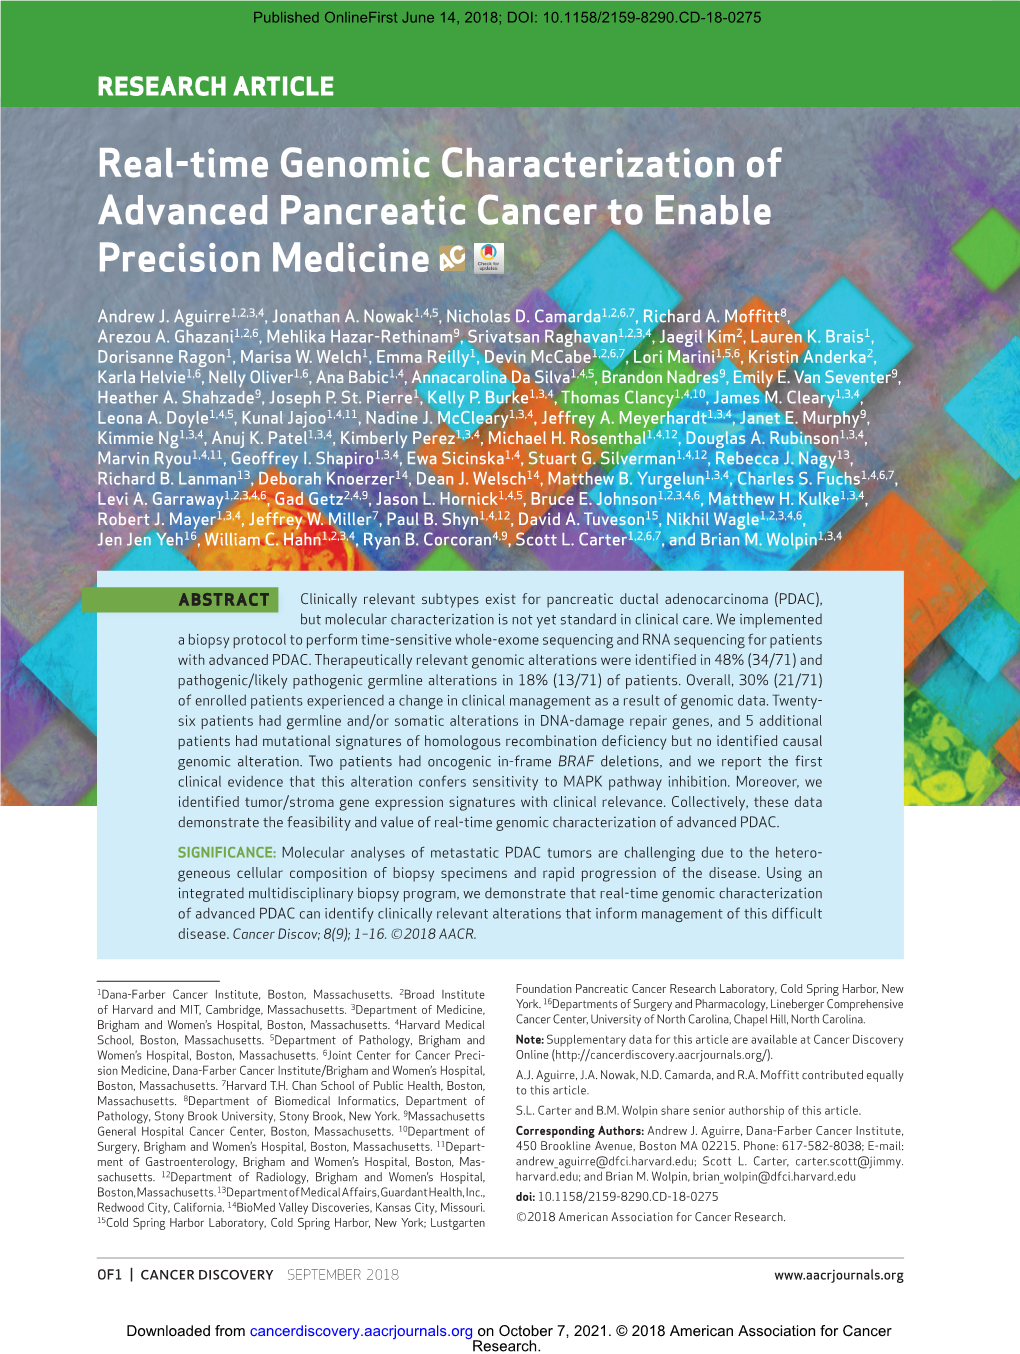 Real-Time Genomic Characterization of Advanced Pancreatic Cancer to Enable Precision Medicine